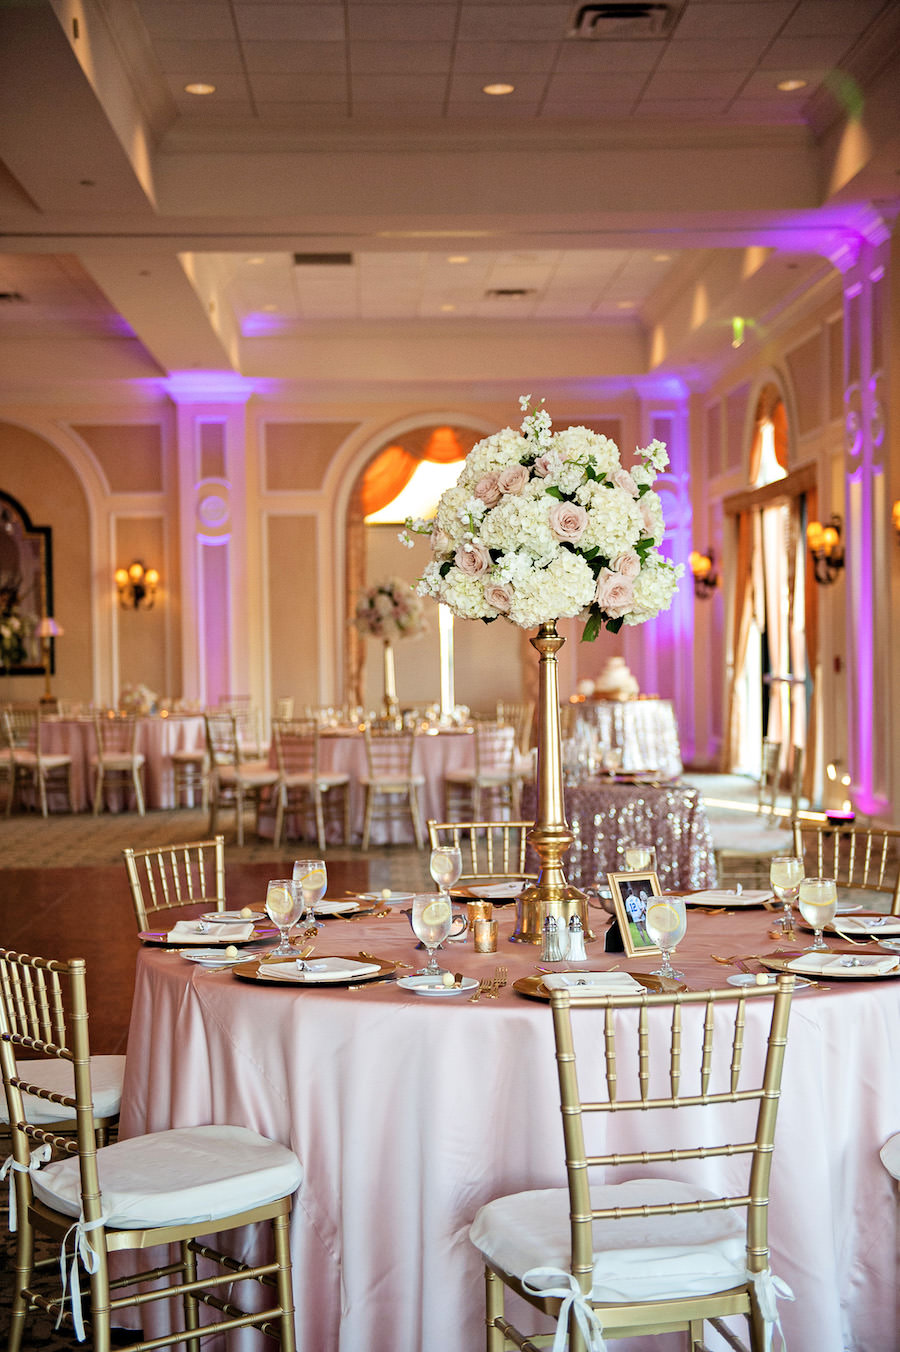 Tall White Hydrangea and Blush Pink Rose Centerpiece Flowers in Gold Vase with Pink Specialty Linens and Gold Chiavari Chairs | Wedding Reception Decor